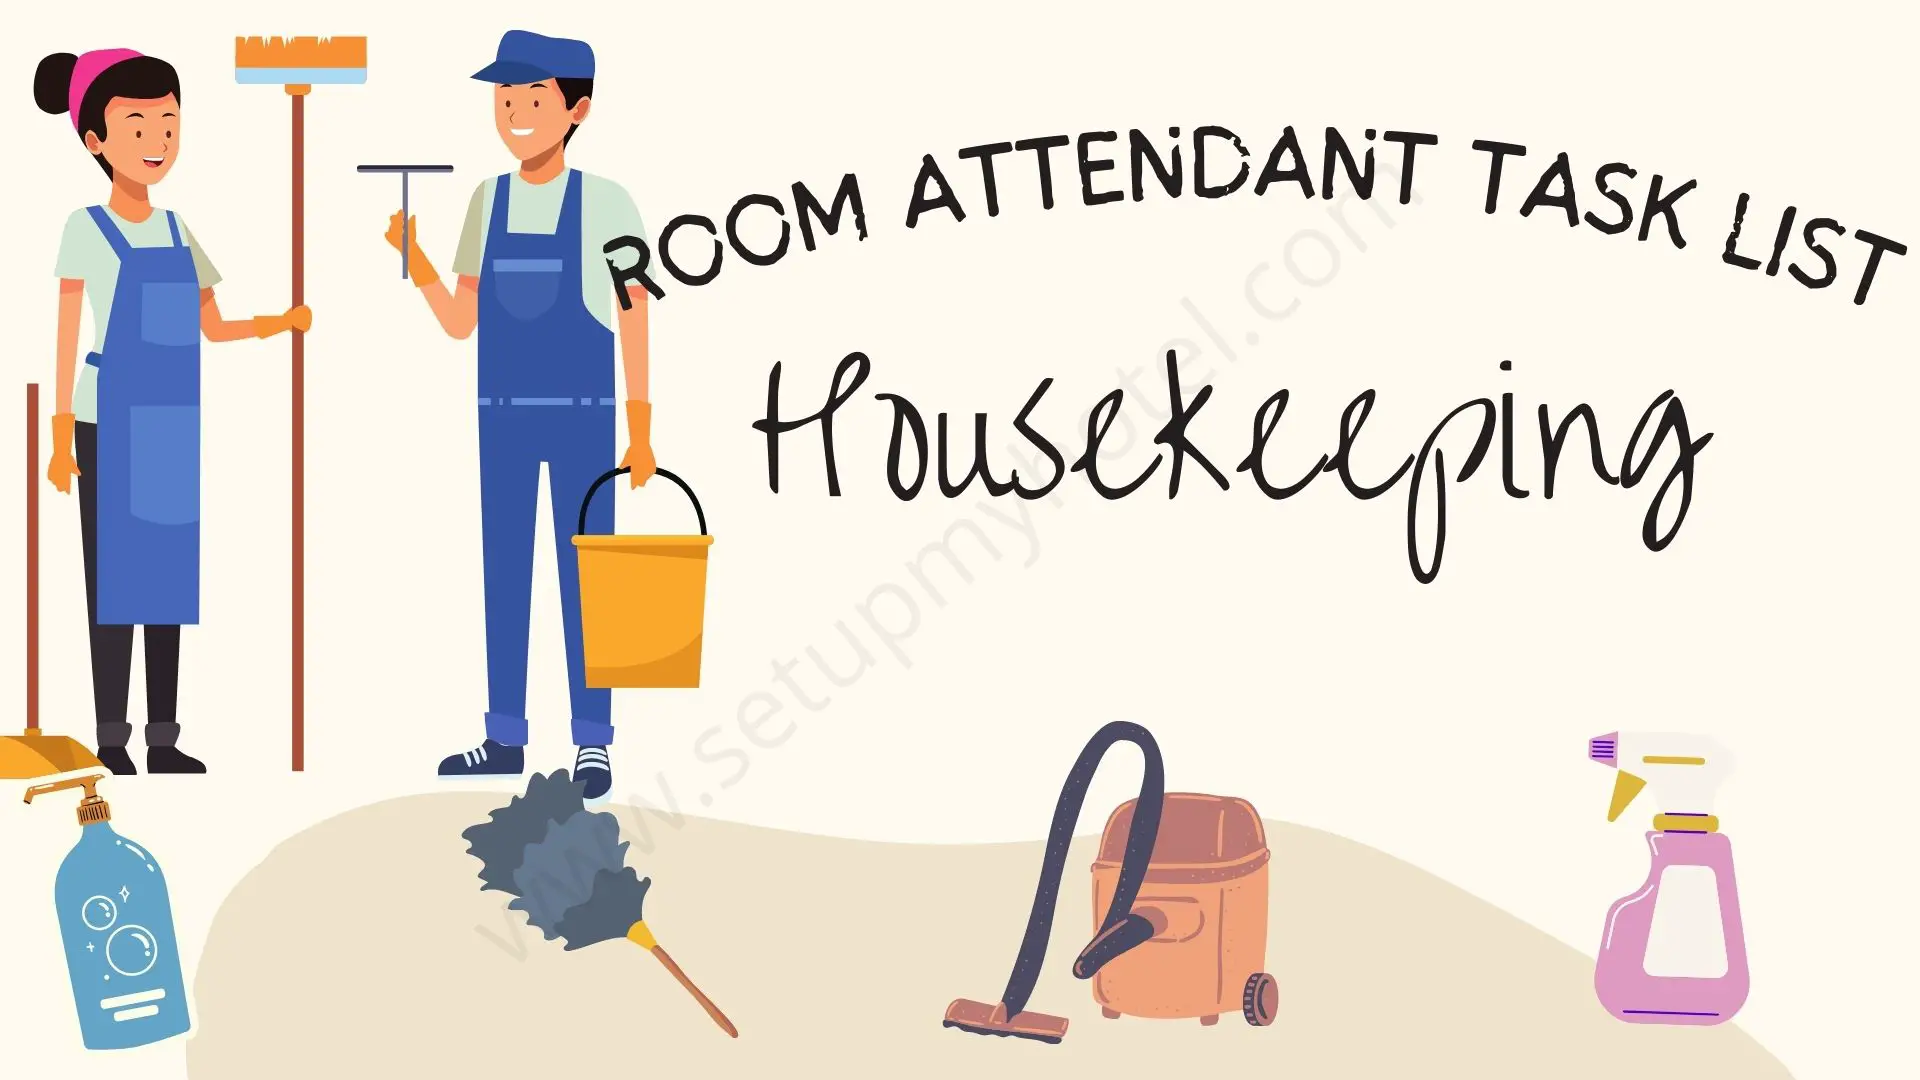 Daily Task List Of A Room Attendant